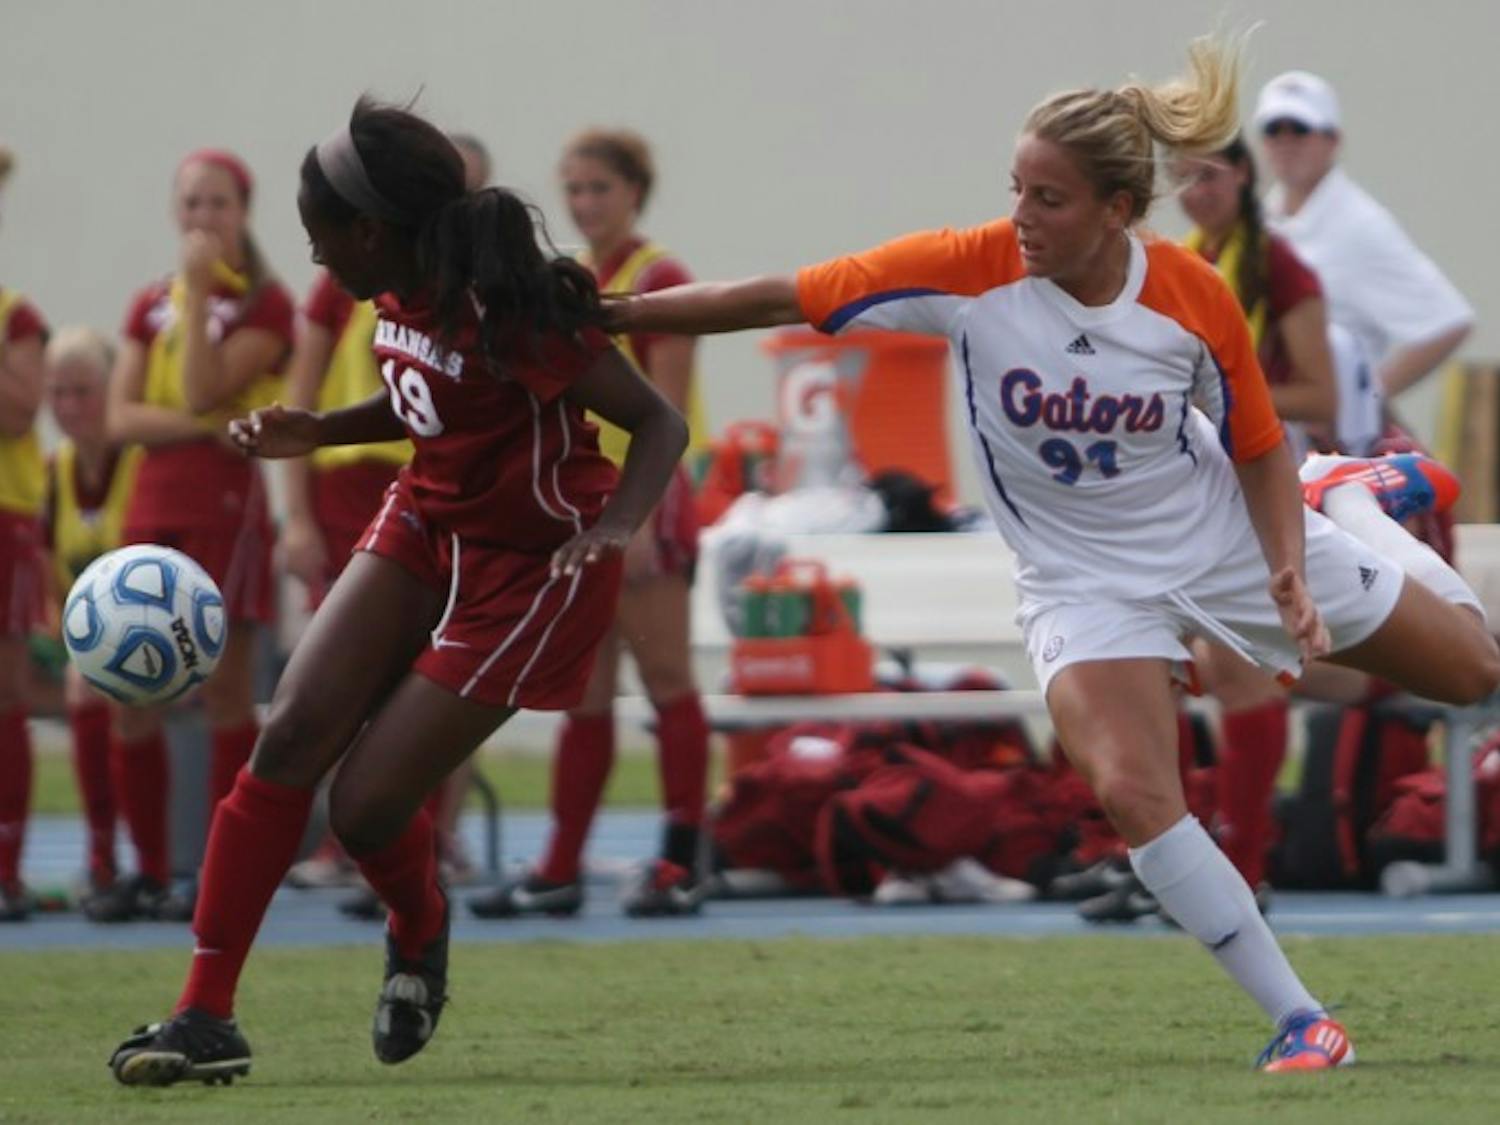 Adriana Leon (91) fights for the ball against Arkansas defender Melanie Foncham (14) in UF's 4-0 win on Sept. 30 at James G. Pressly Stadium. Leon kicked the game-winning goal in the 39th minute against No. 5 Texas A&amp;M on Sunday in College Station, Texas.